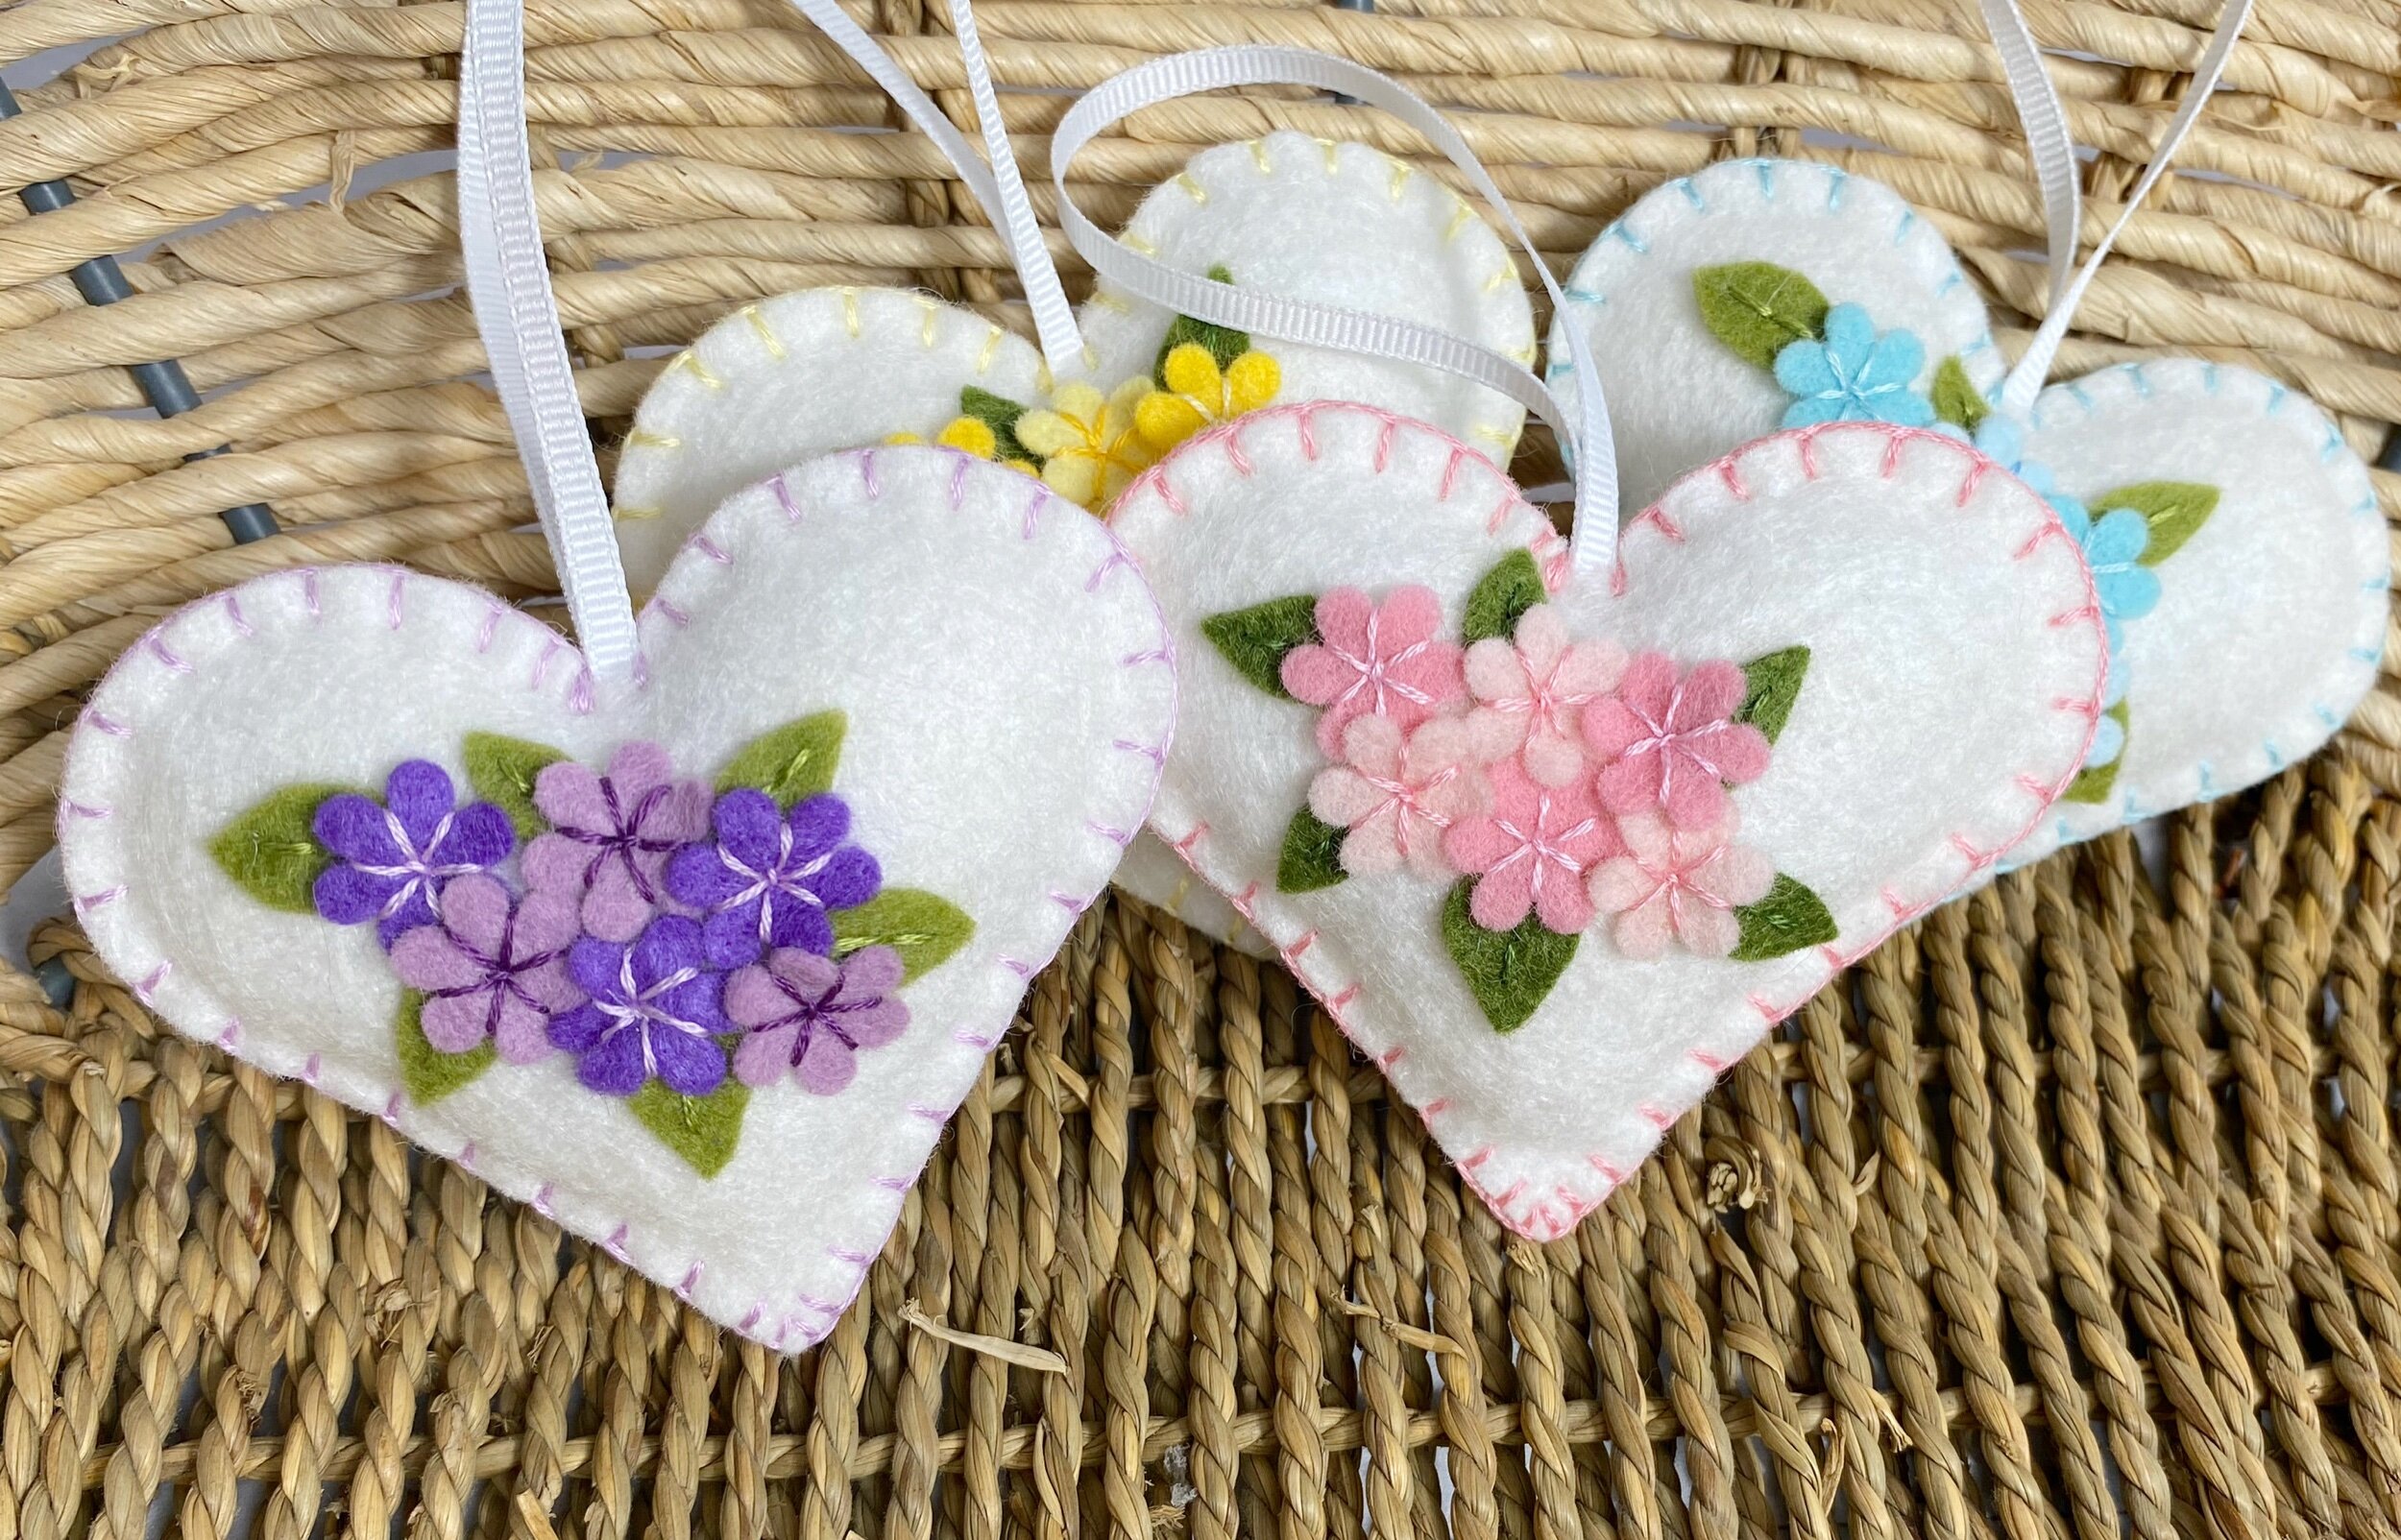 Hand Felted Heart Ornaments | swcs